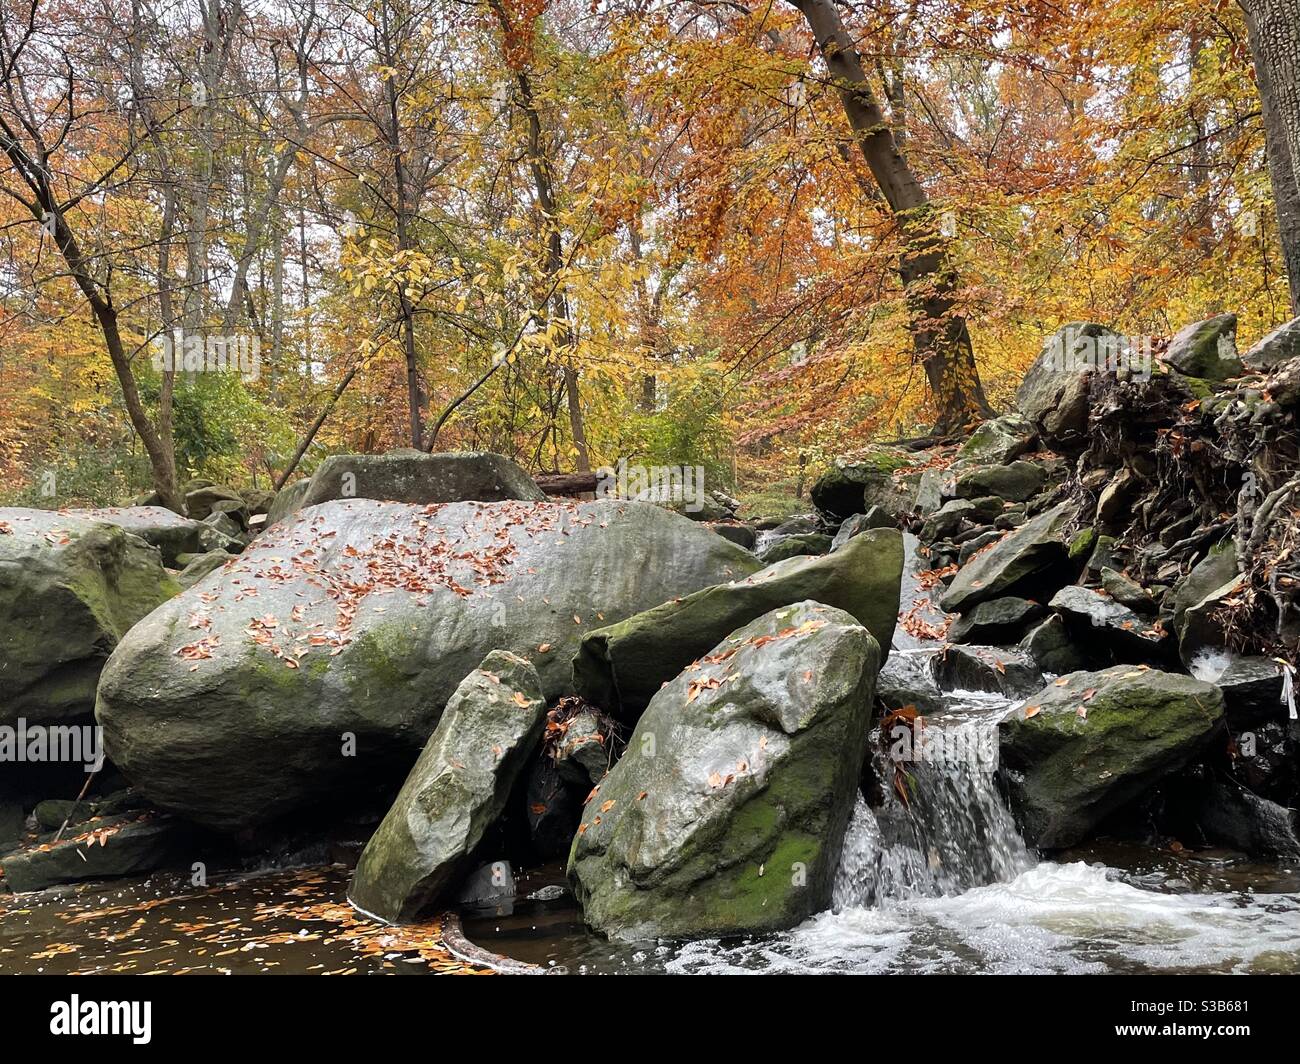 A small creek flows through the forest on a crisp autumn morning. Stock Photo